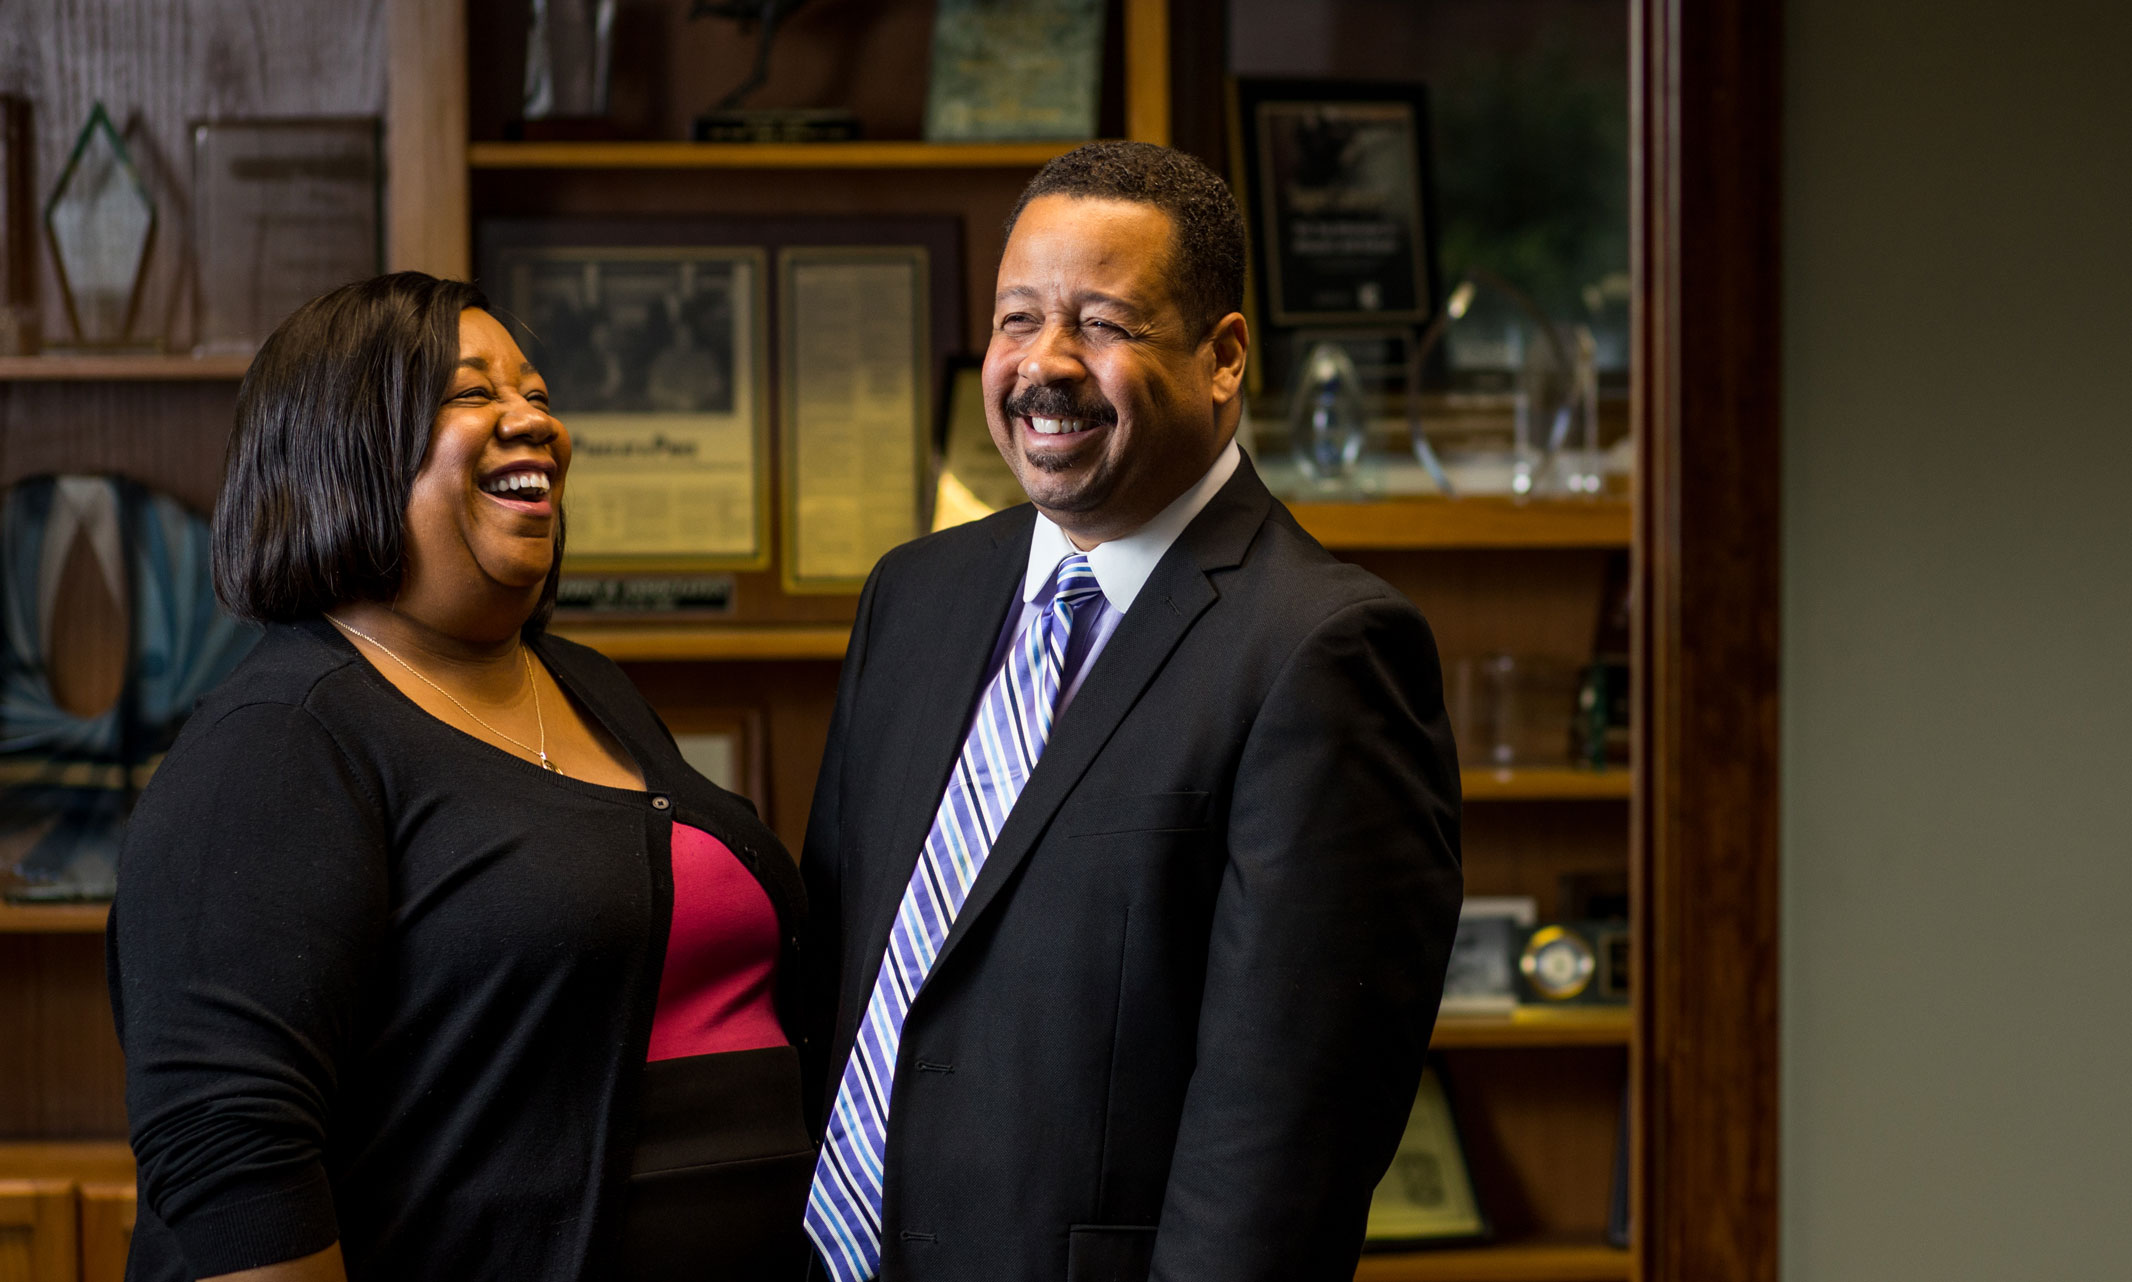 Dana and Keith Cutler laugh together in their Kansas City law office. Photo by Brandon Parigo, Strategic Marketing and Communications.